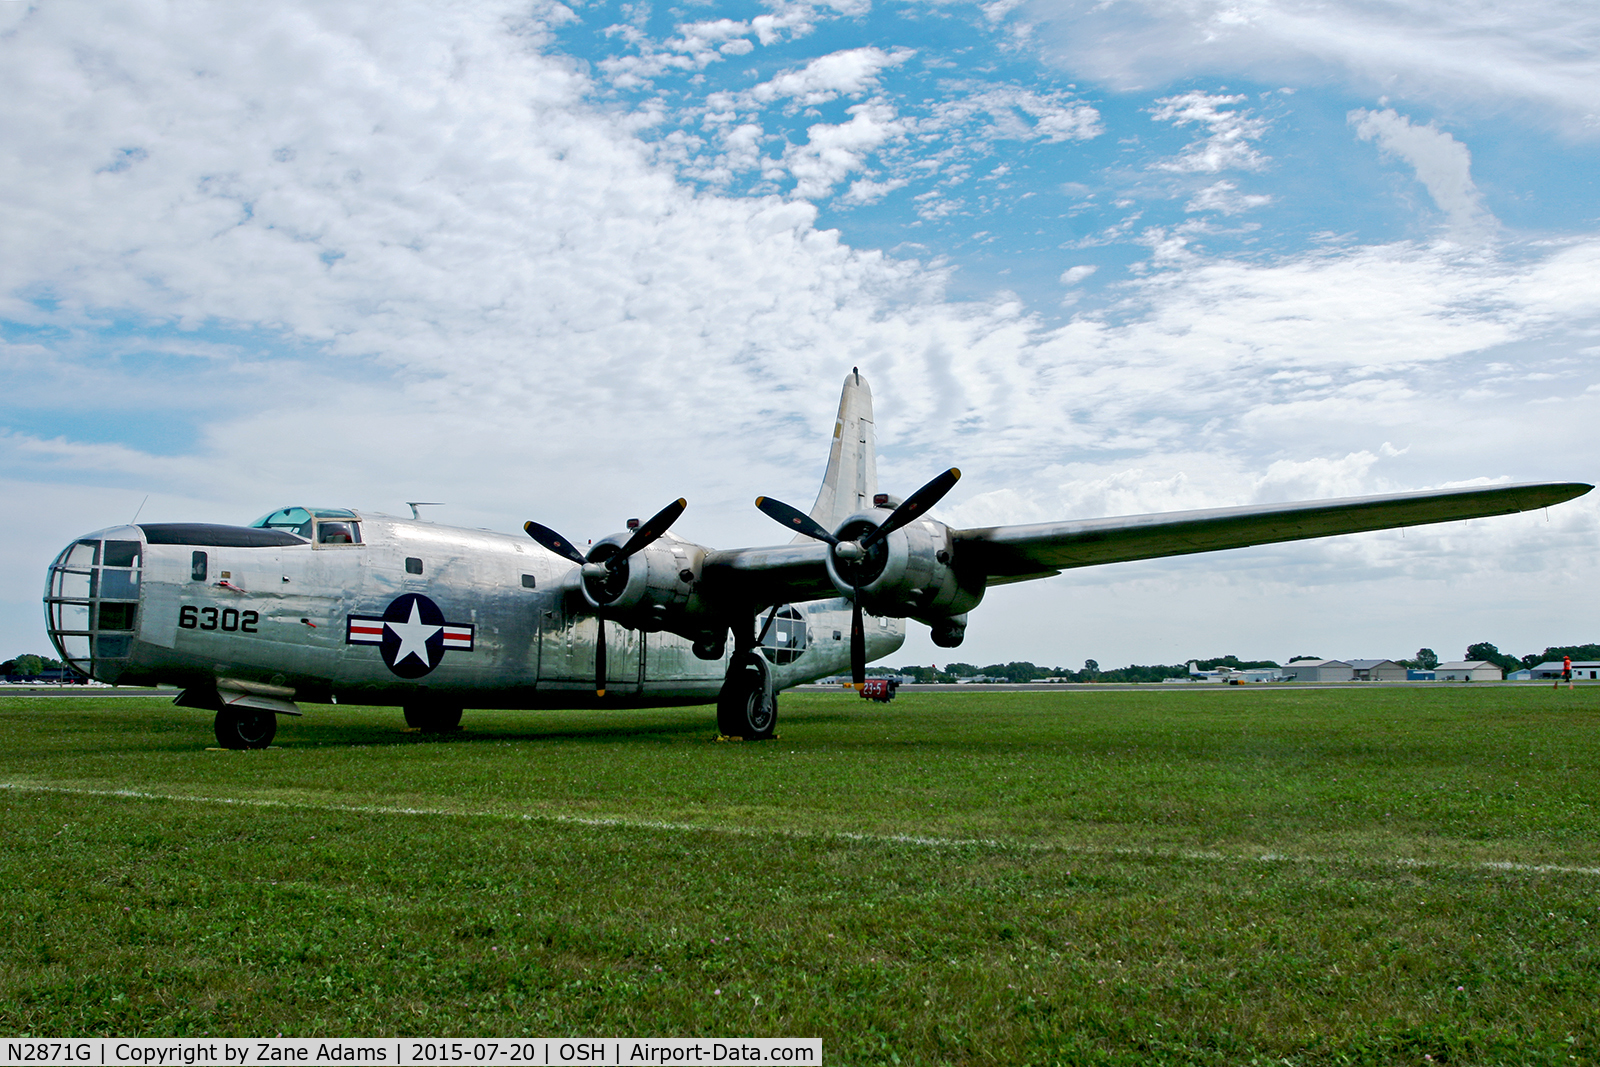 N2871G, Consolidated Vultee P4Y-2 Privateer C/N 66302, 2015 - EAA AirVenture - Oshkosh Wisconsin